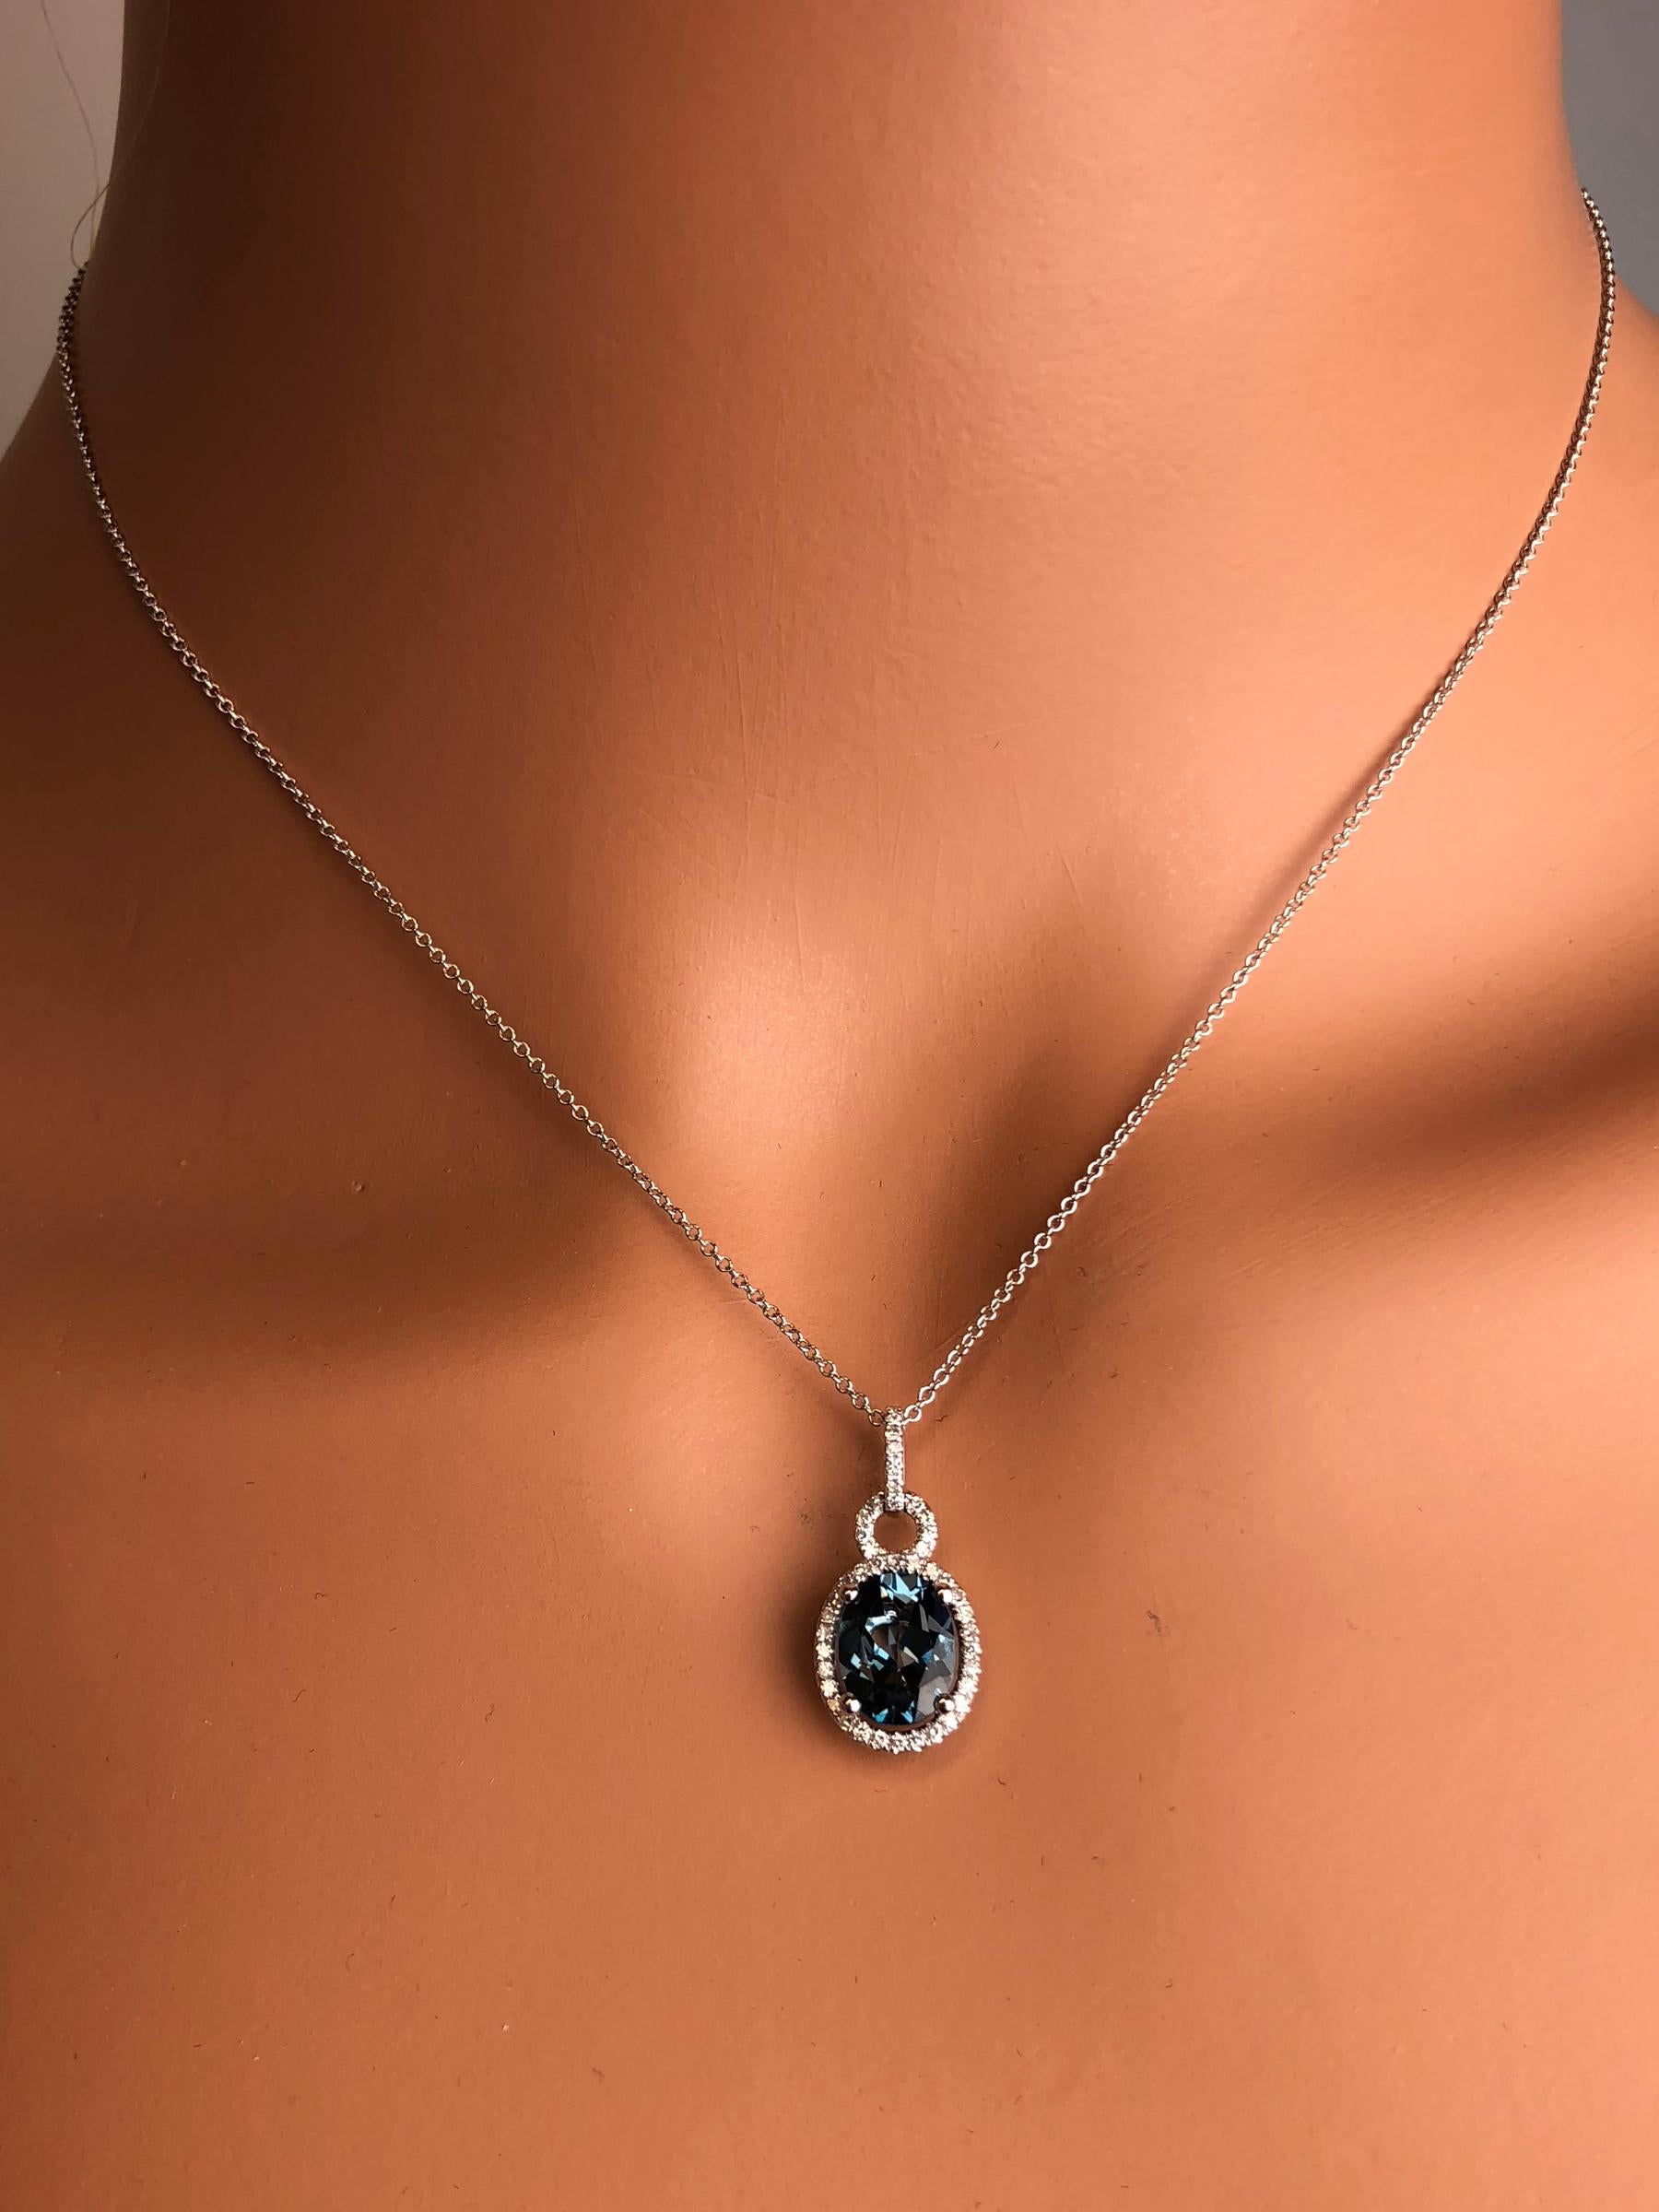 (DiamondTown) This lovely halo pendant features 2.15 carats oval cut Blue Topaz surrounded by a halo of round white diamonds.

Center: 2.15 carats Blue Topaz
Diamond Halo: 43 round diamonds total 0.16 carats
Set in 14k White Gold.

Many of our items